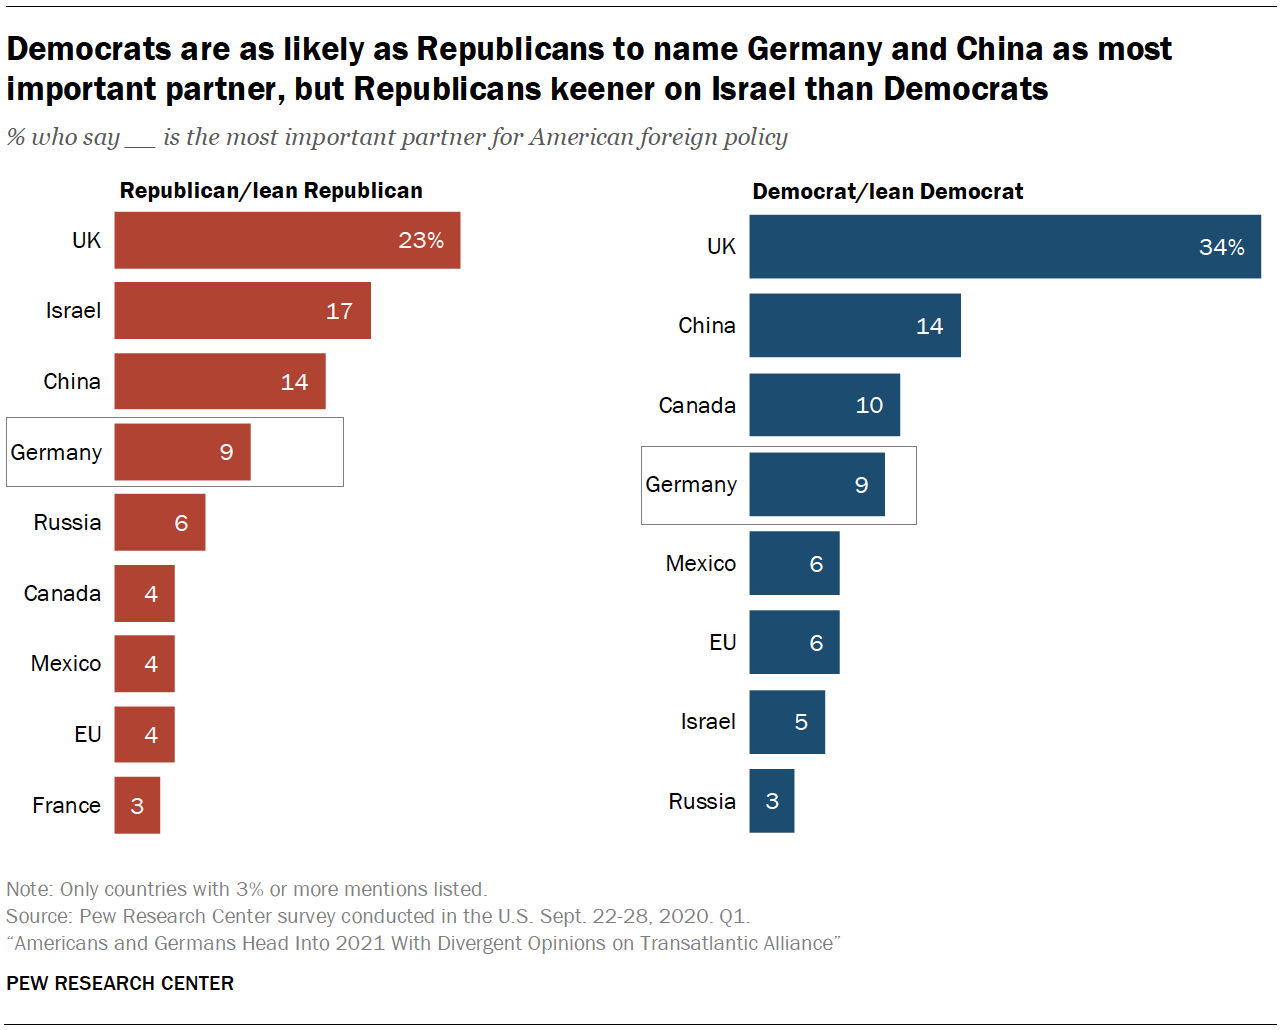 Democrats are as likely as Republicans to name Germany and China as most important partner, but Republicans keener on Israel than Democrats